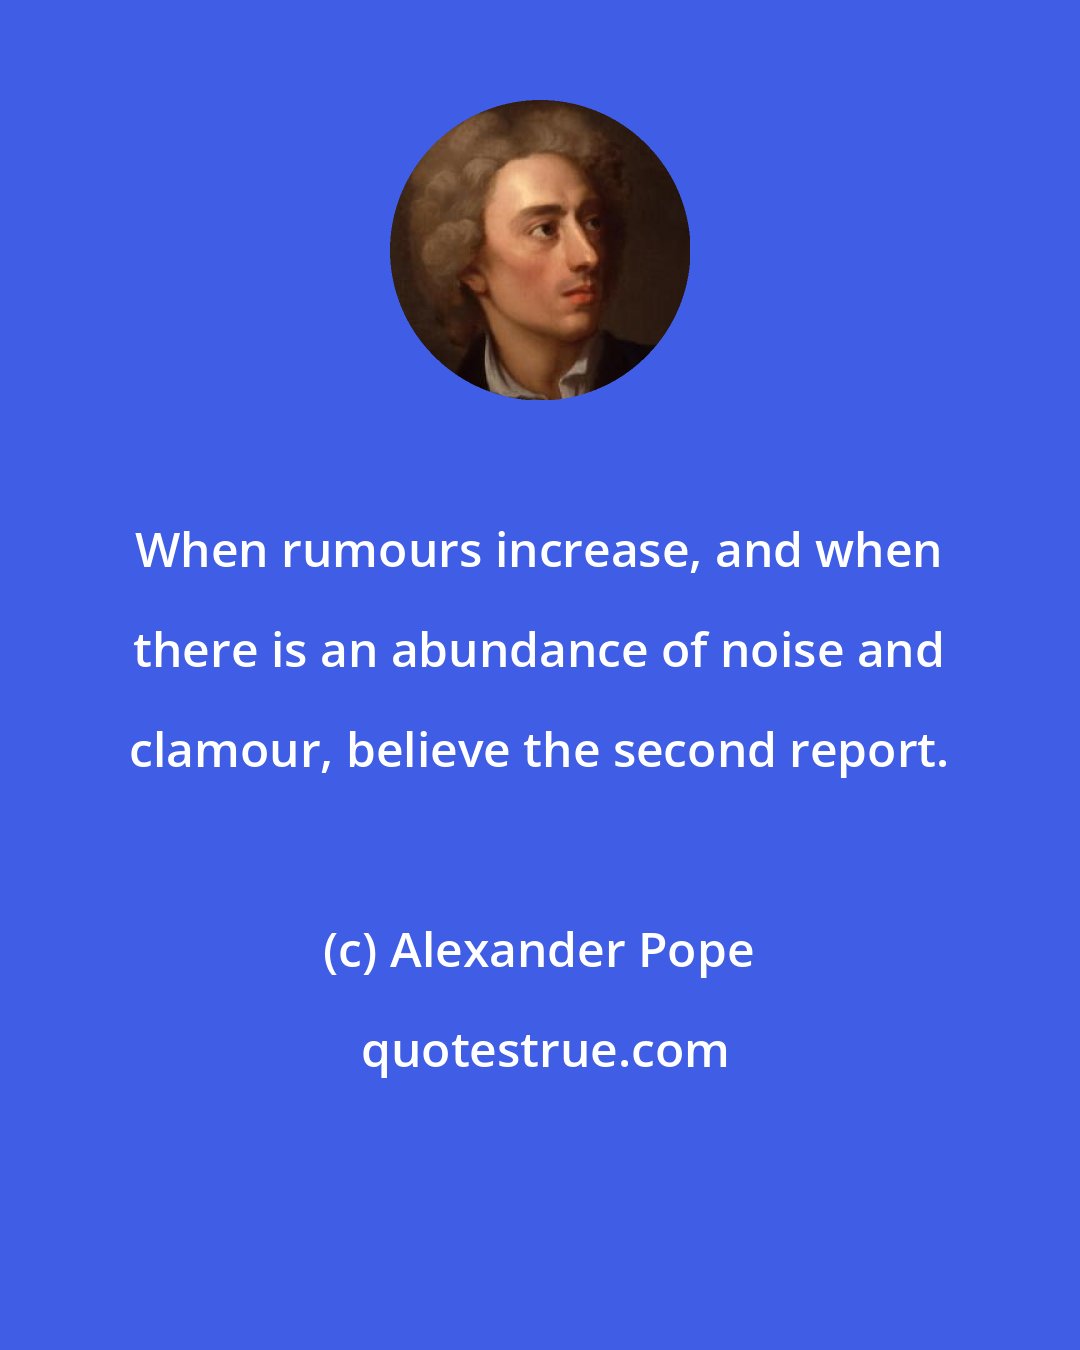 Alexander Pope: When rumours increase, and when there is an abundance of noise and clamour, believe the second report.